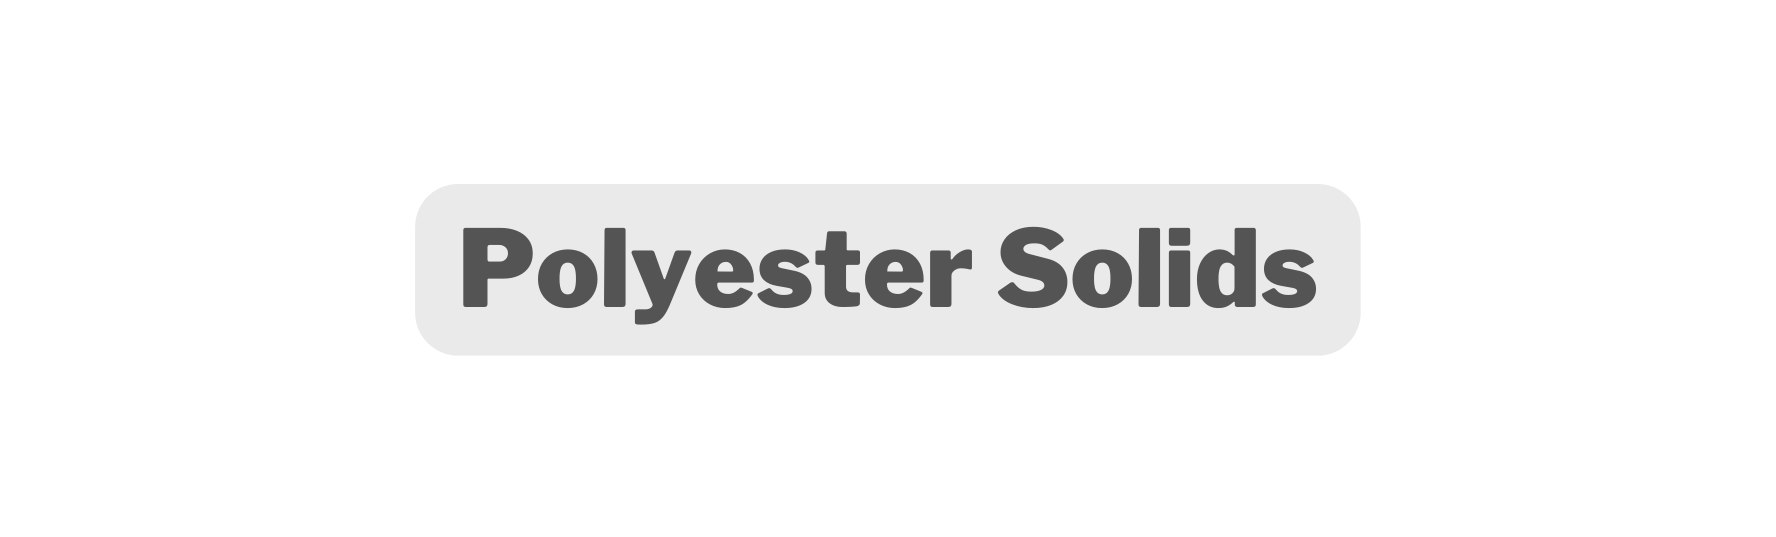 Polyester Solids